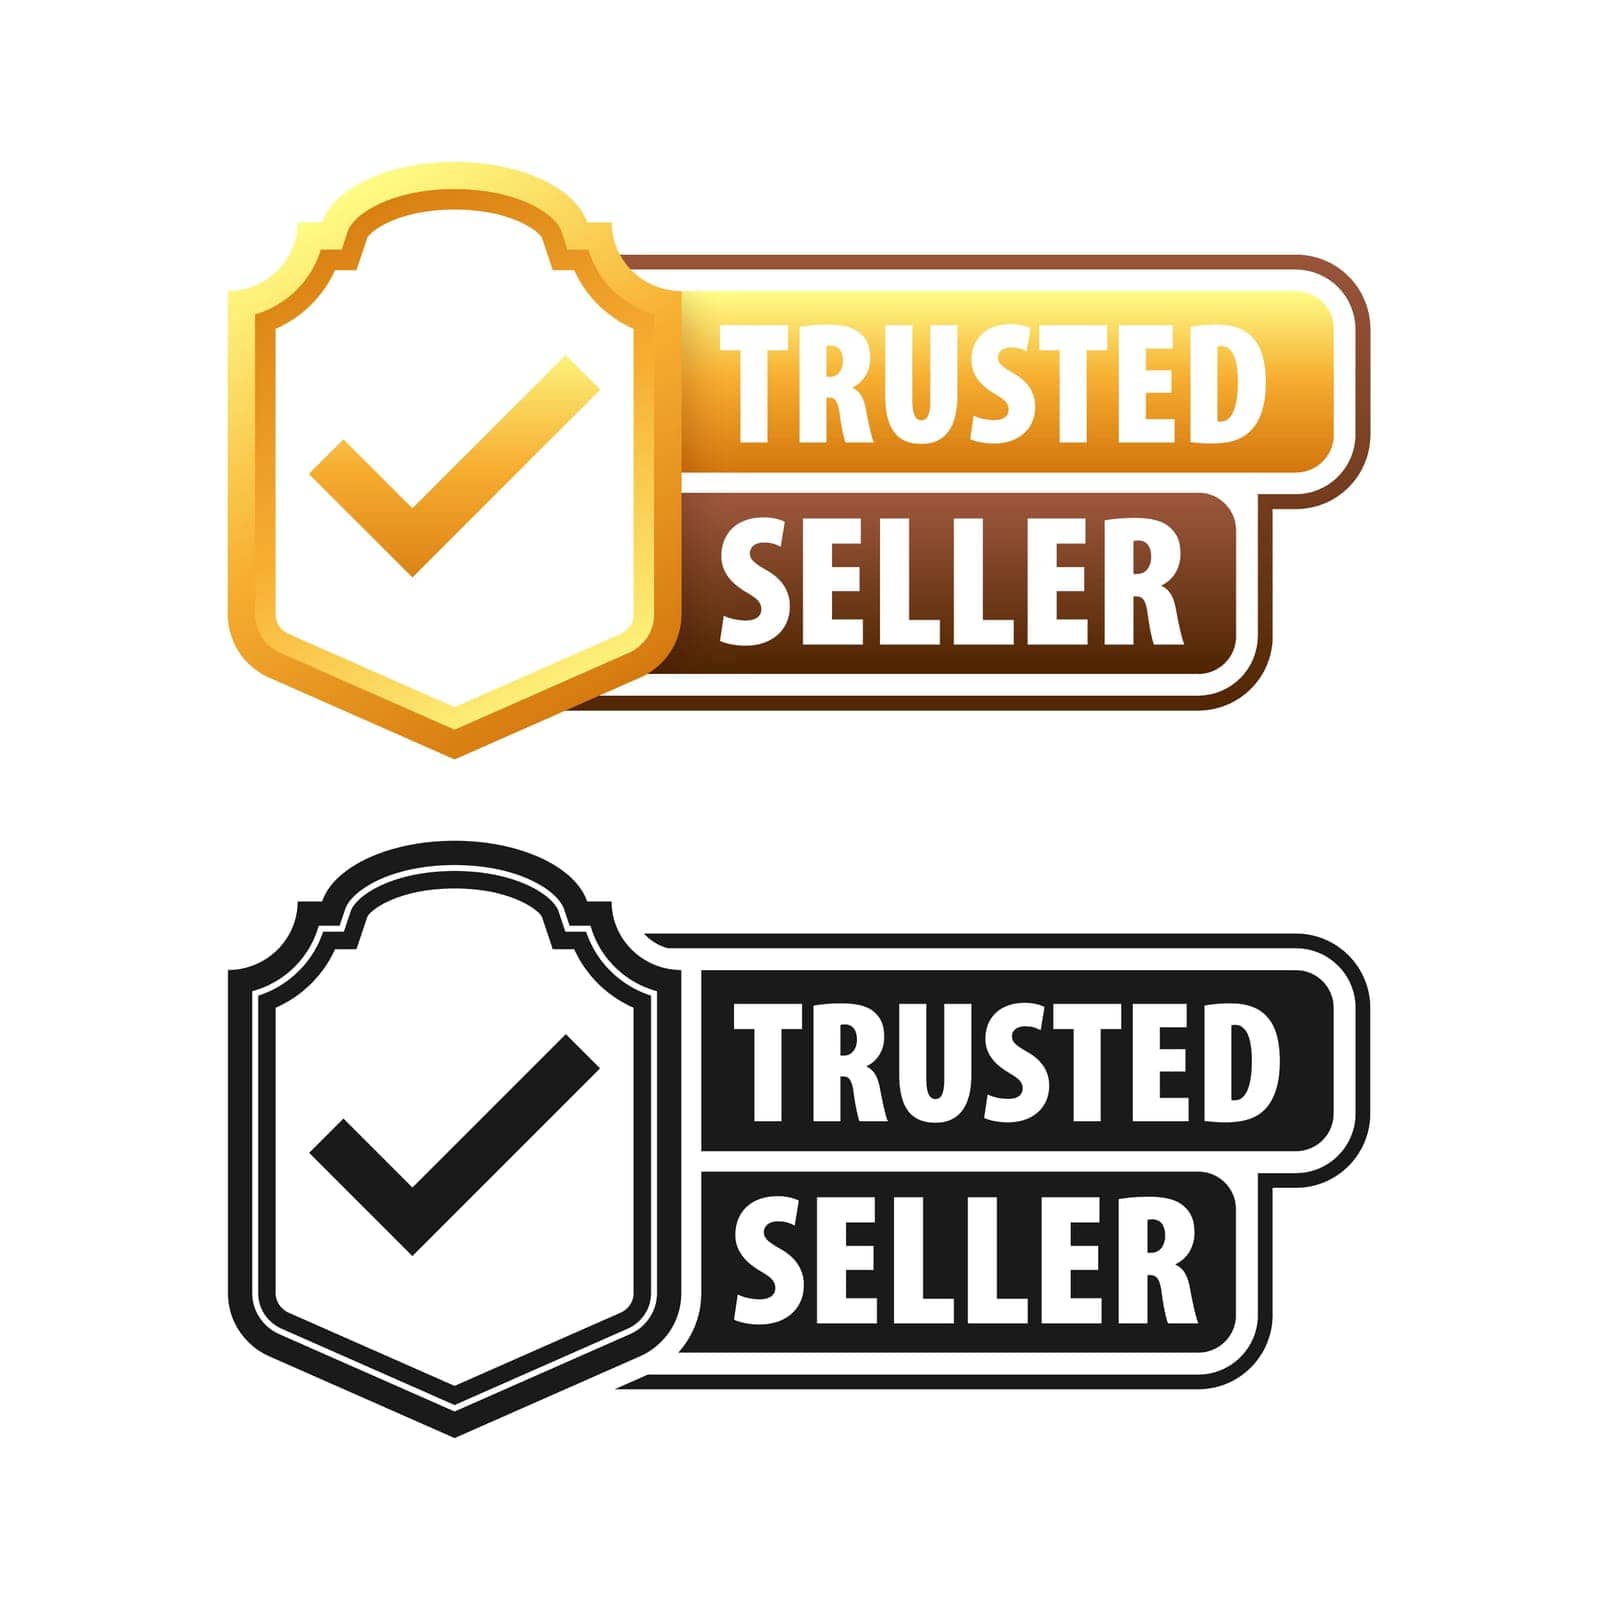 Trusted Seller label. Trust and reliability in every transaction. Vector illustration